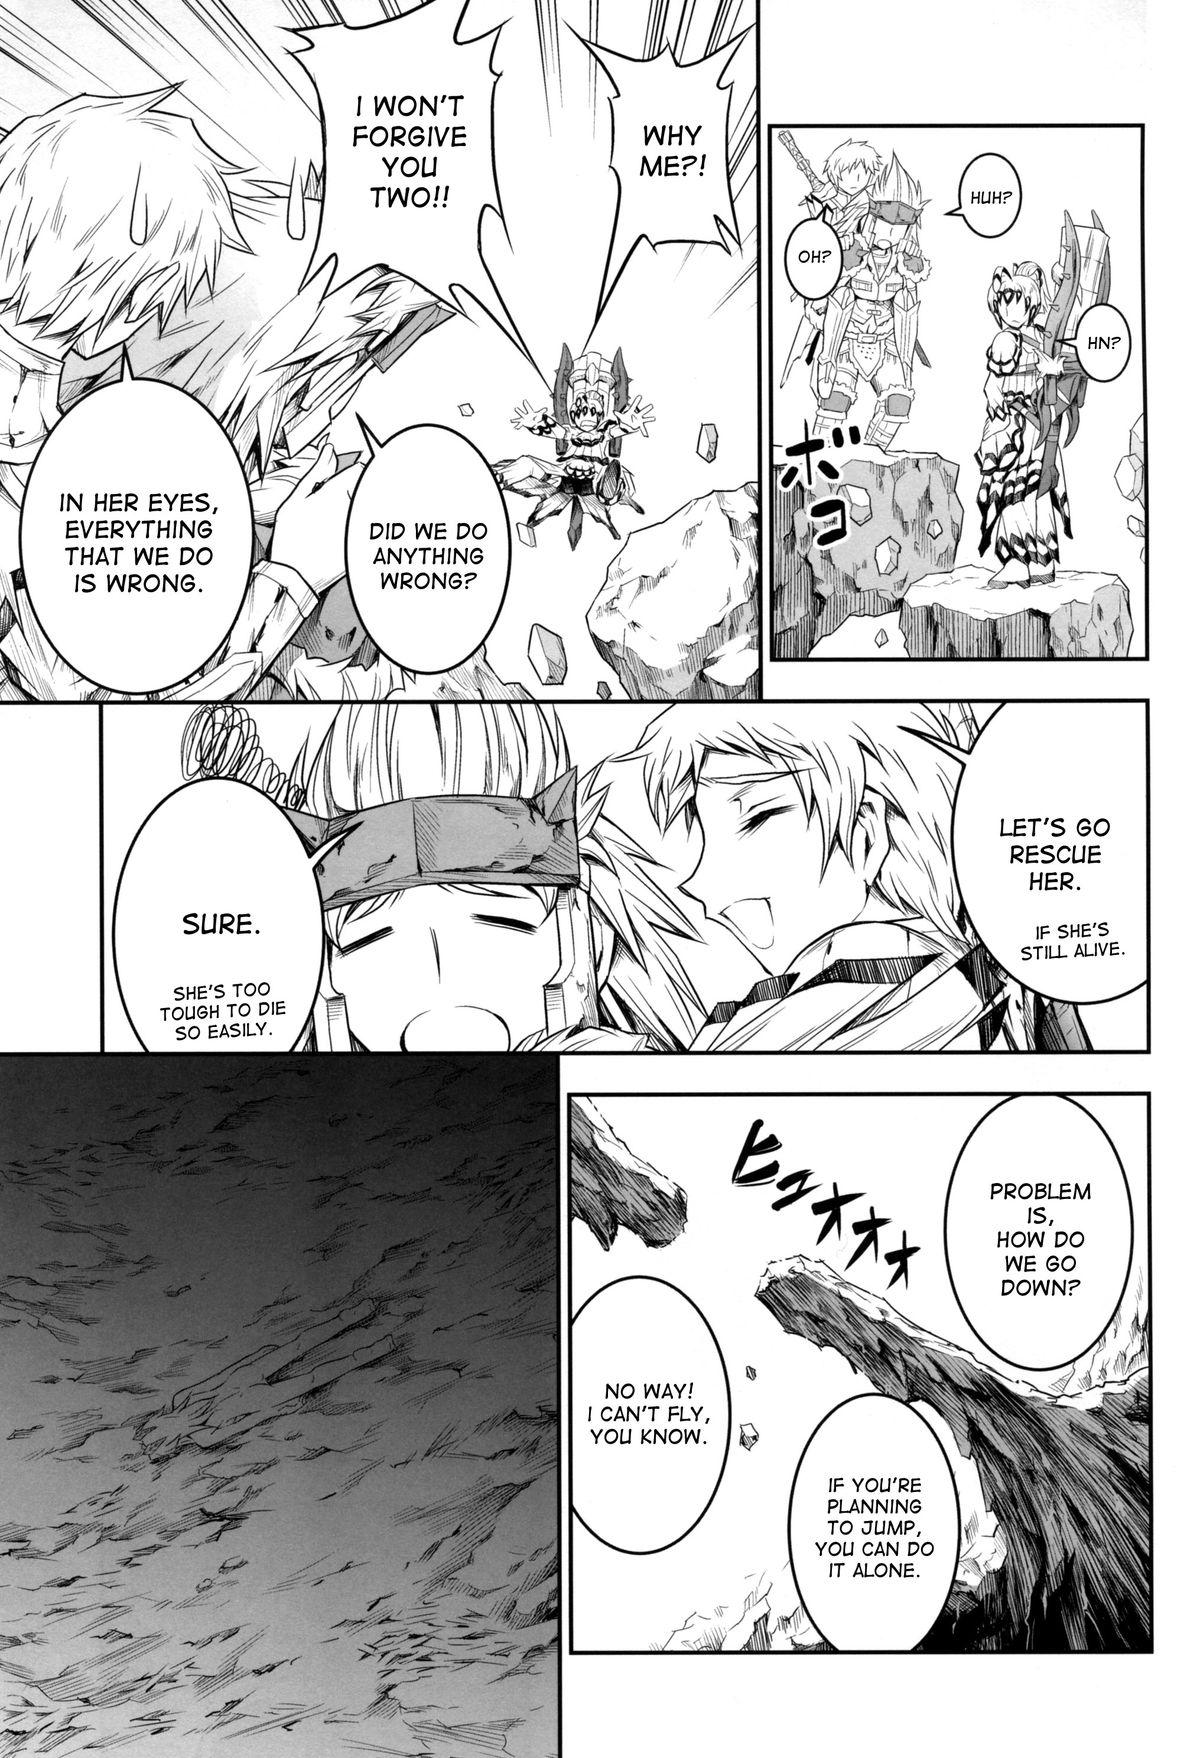 Gorda Solo Hunter no Seitai 4 The fourth part - Monster hunter Lovers - Page 10